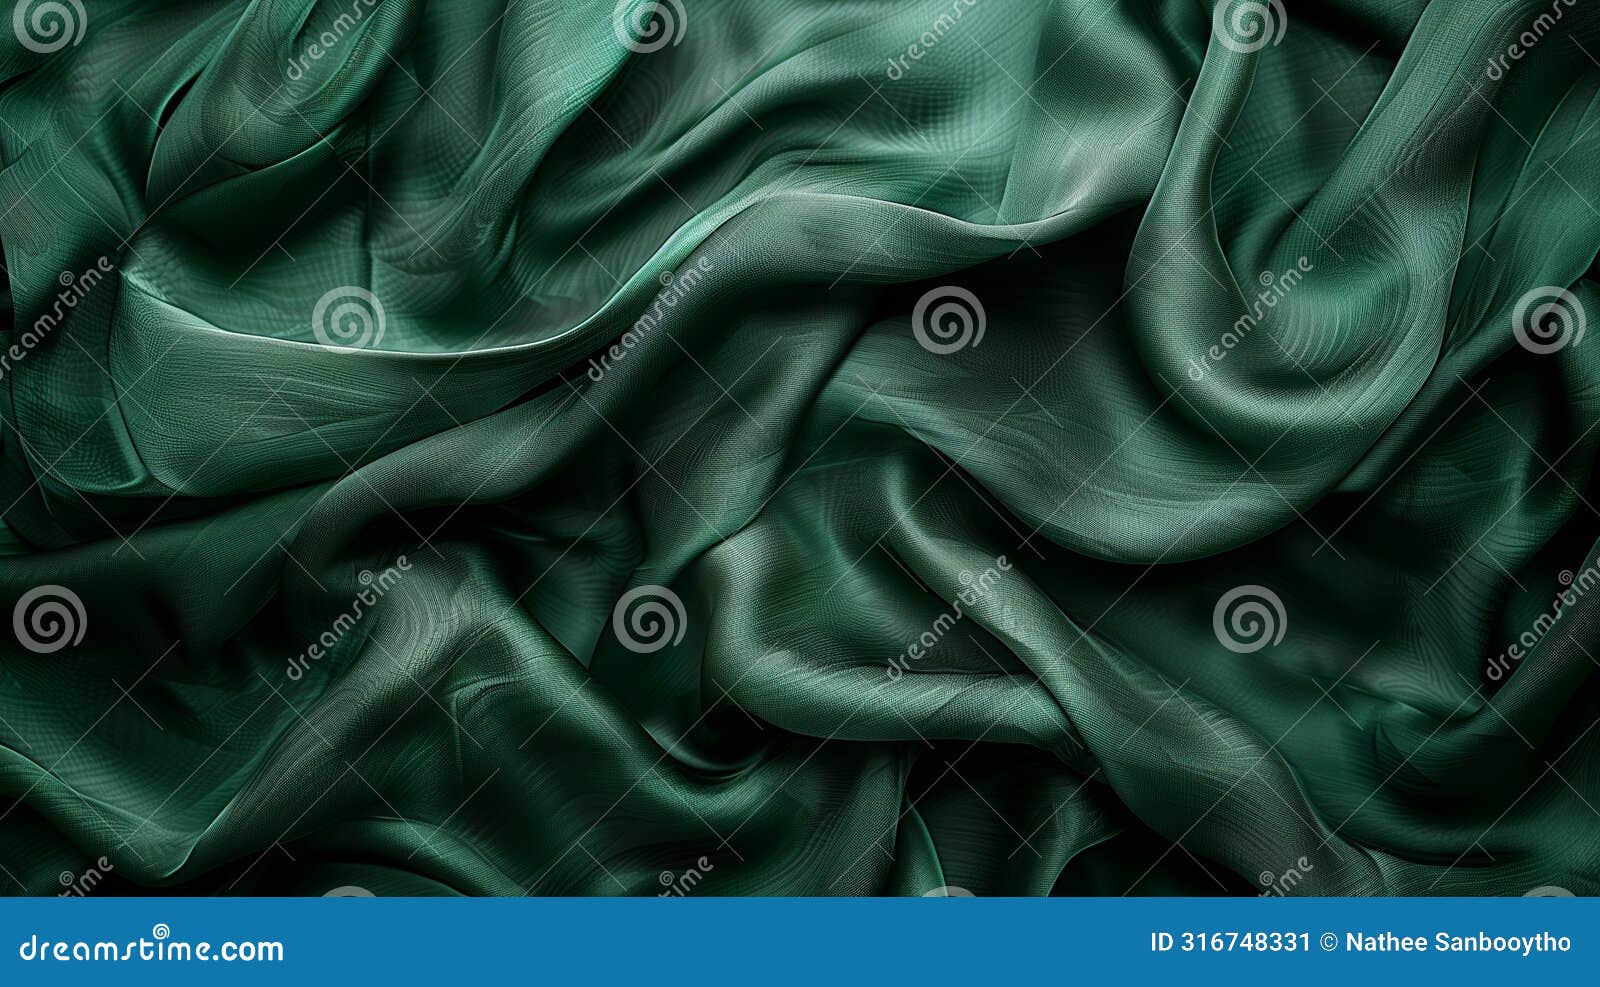 emerald green satin fabric with luxurious folds